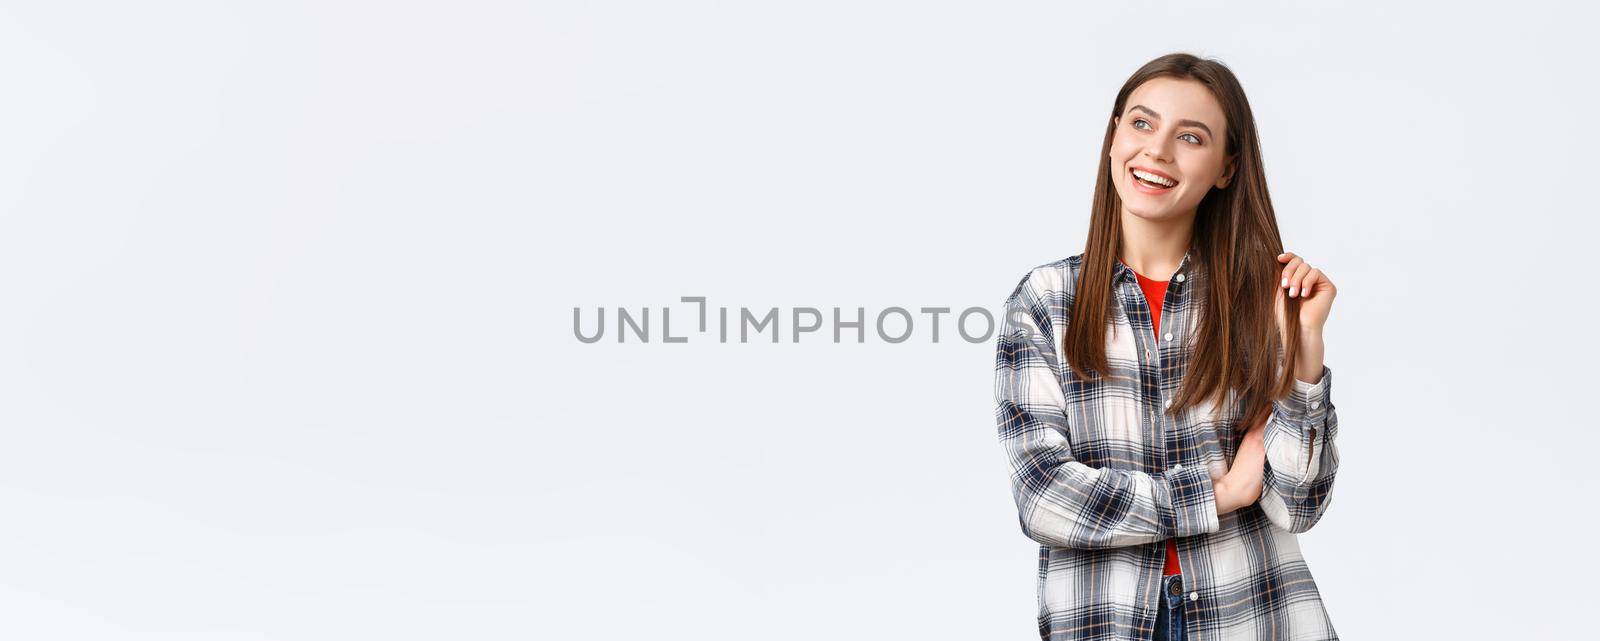 Lifestyle, different emotions, leisure activities concept. Dreamy and delighted, happy smiling woman, female student in checked casual shirt looking upper left corner with pleased expression.